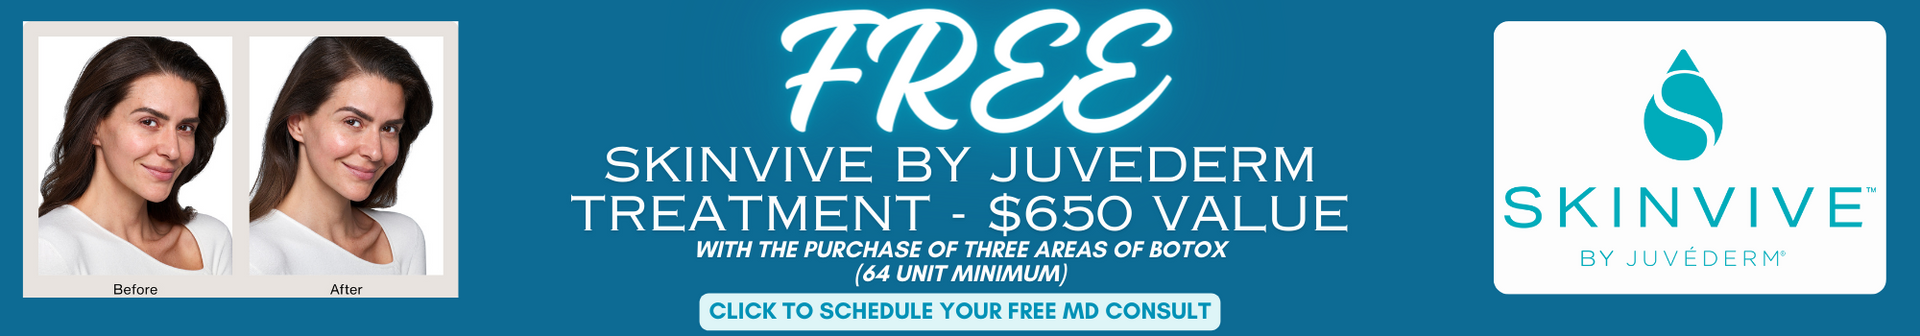 Free Skinvive by Juvederm Treatment with the purchase of BOTOX